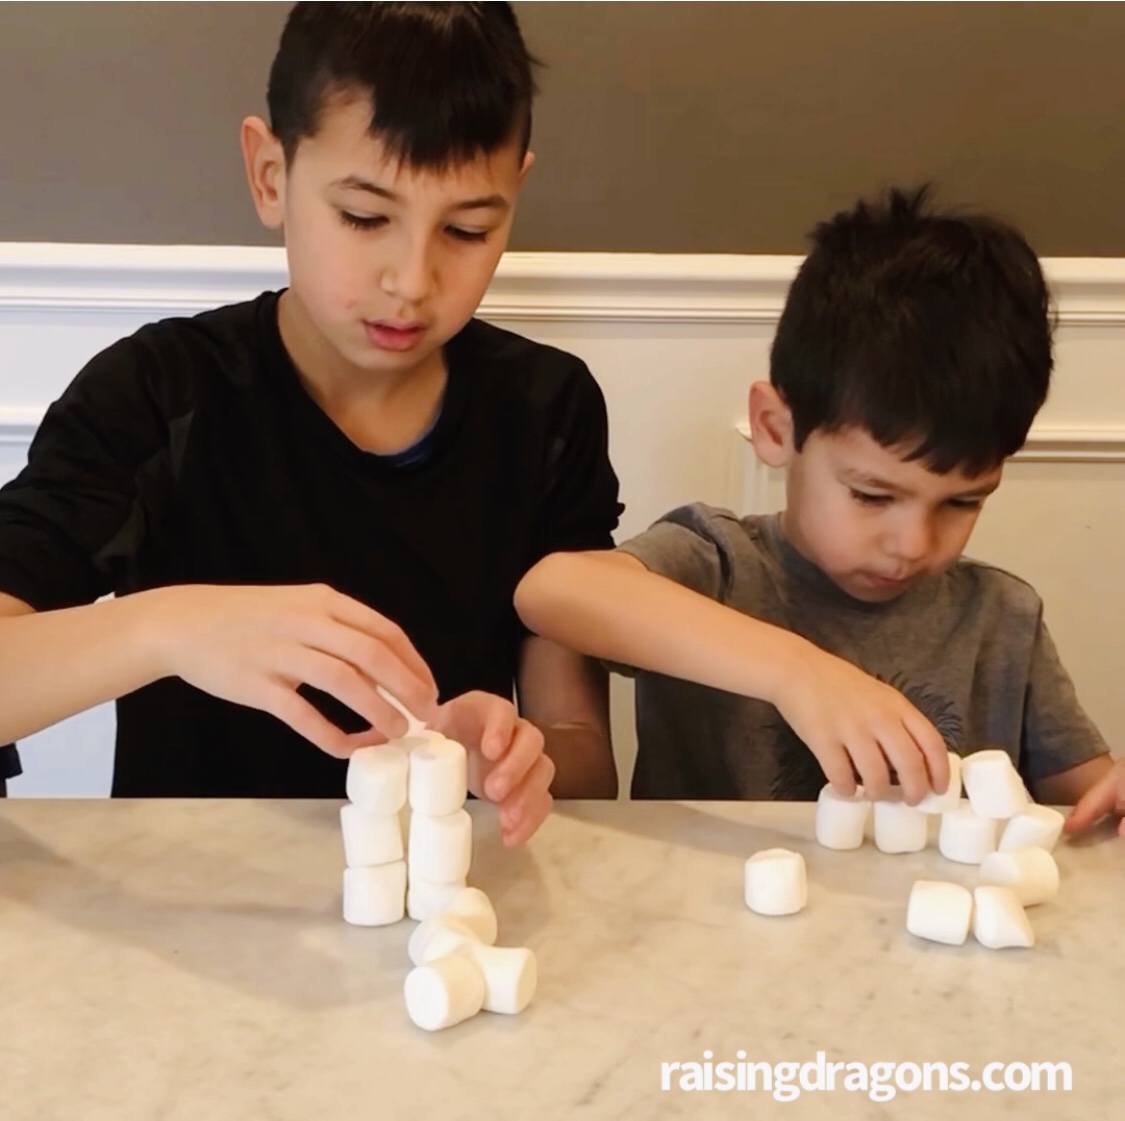 10 Minute To Win It Games For Kids ⋆ Raising Dragons